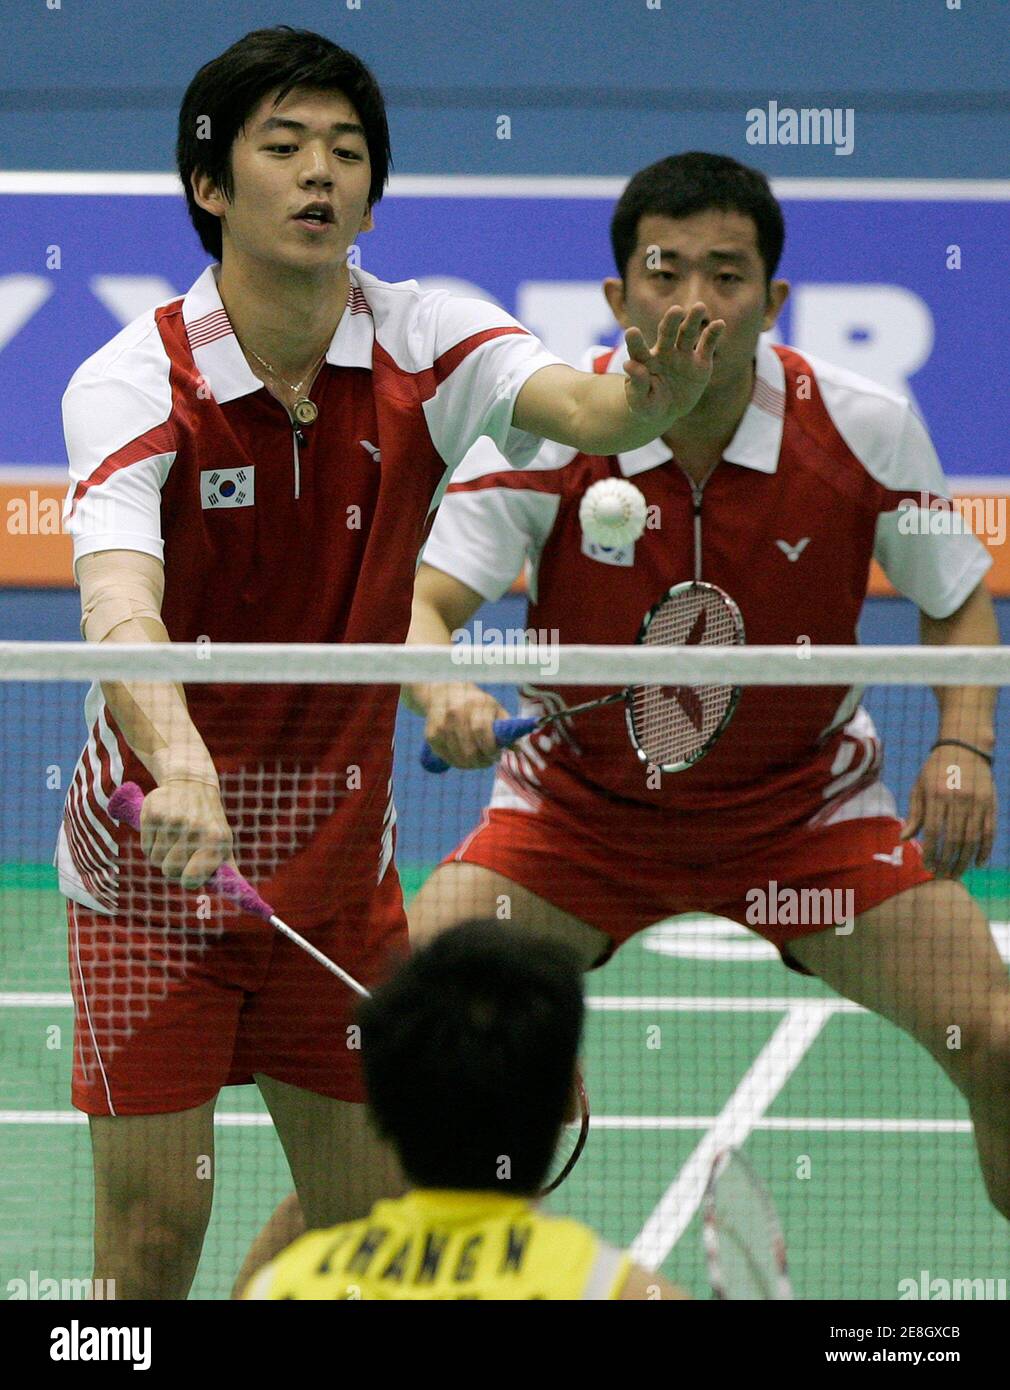 South Korea's Lee Yong-dae (front) serves as his teammate Jung Jae-sung watches during their men's doubles semi-final match against China's Zhang Nan and Chai Biao at the Victor Korea Open Badminton Super Series in Seoul January 16, 2010.  REUTERS/Jo Yong-Hak (SOUTH KOREA - Tags: SPORT BADMINTON) Stock Photo